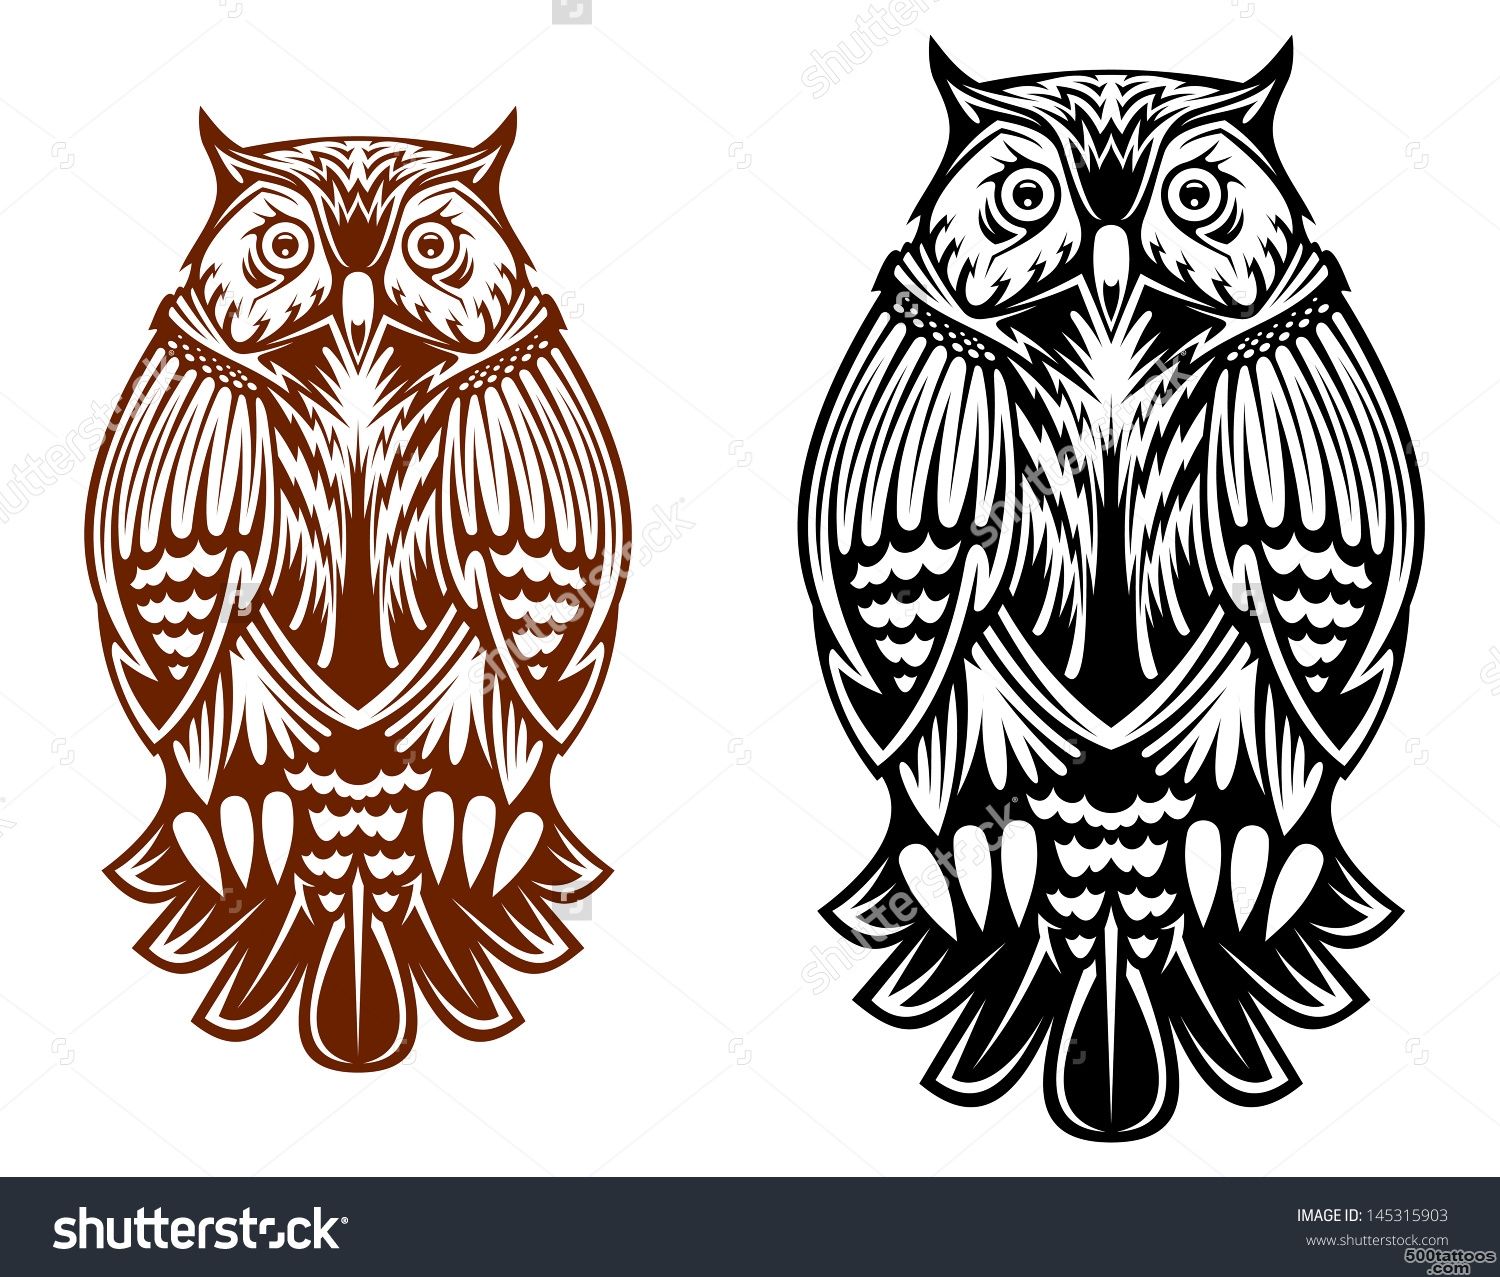 Beautiful Owl Isolated On White Background For Sport Team Mascot ..._44